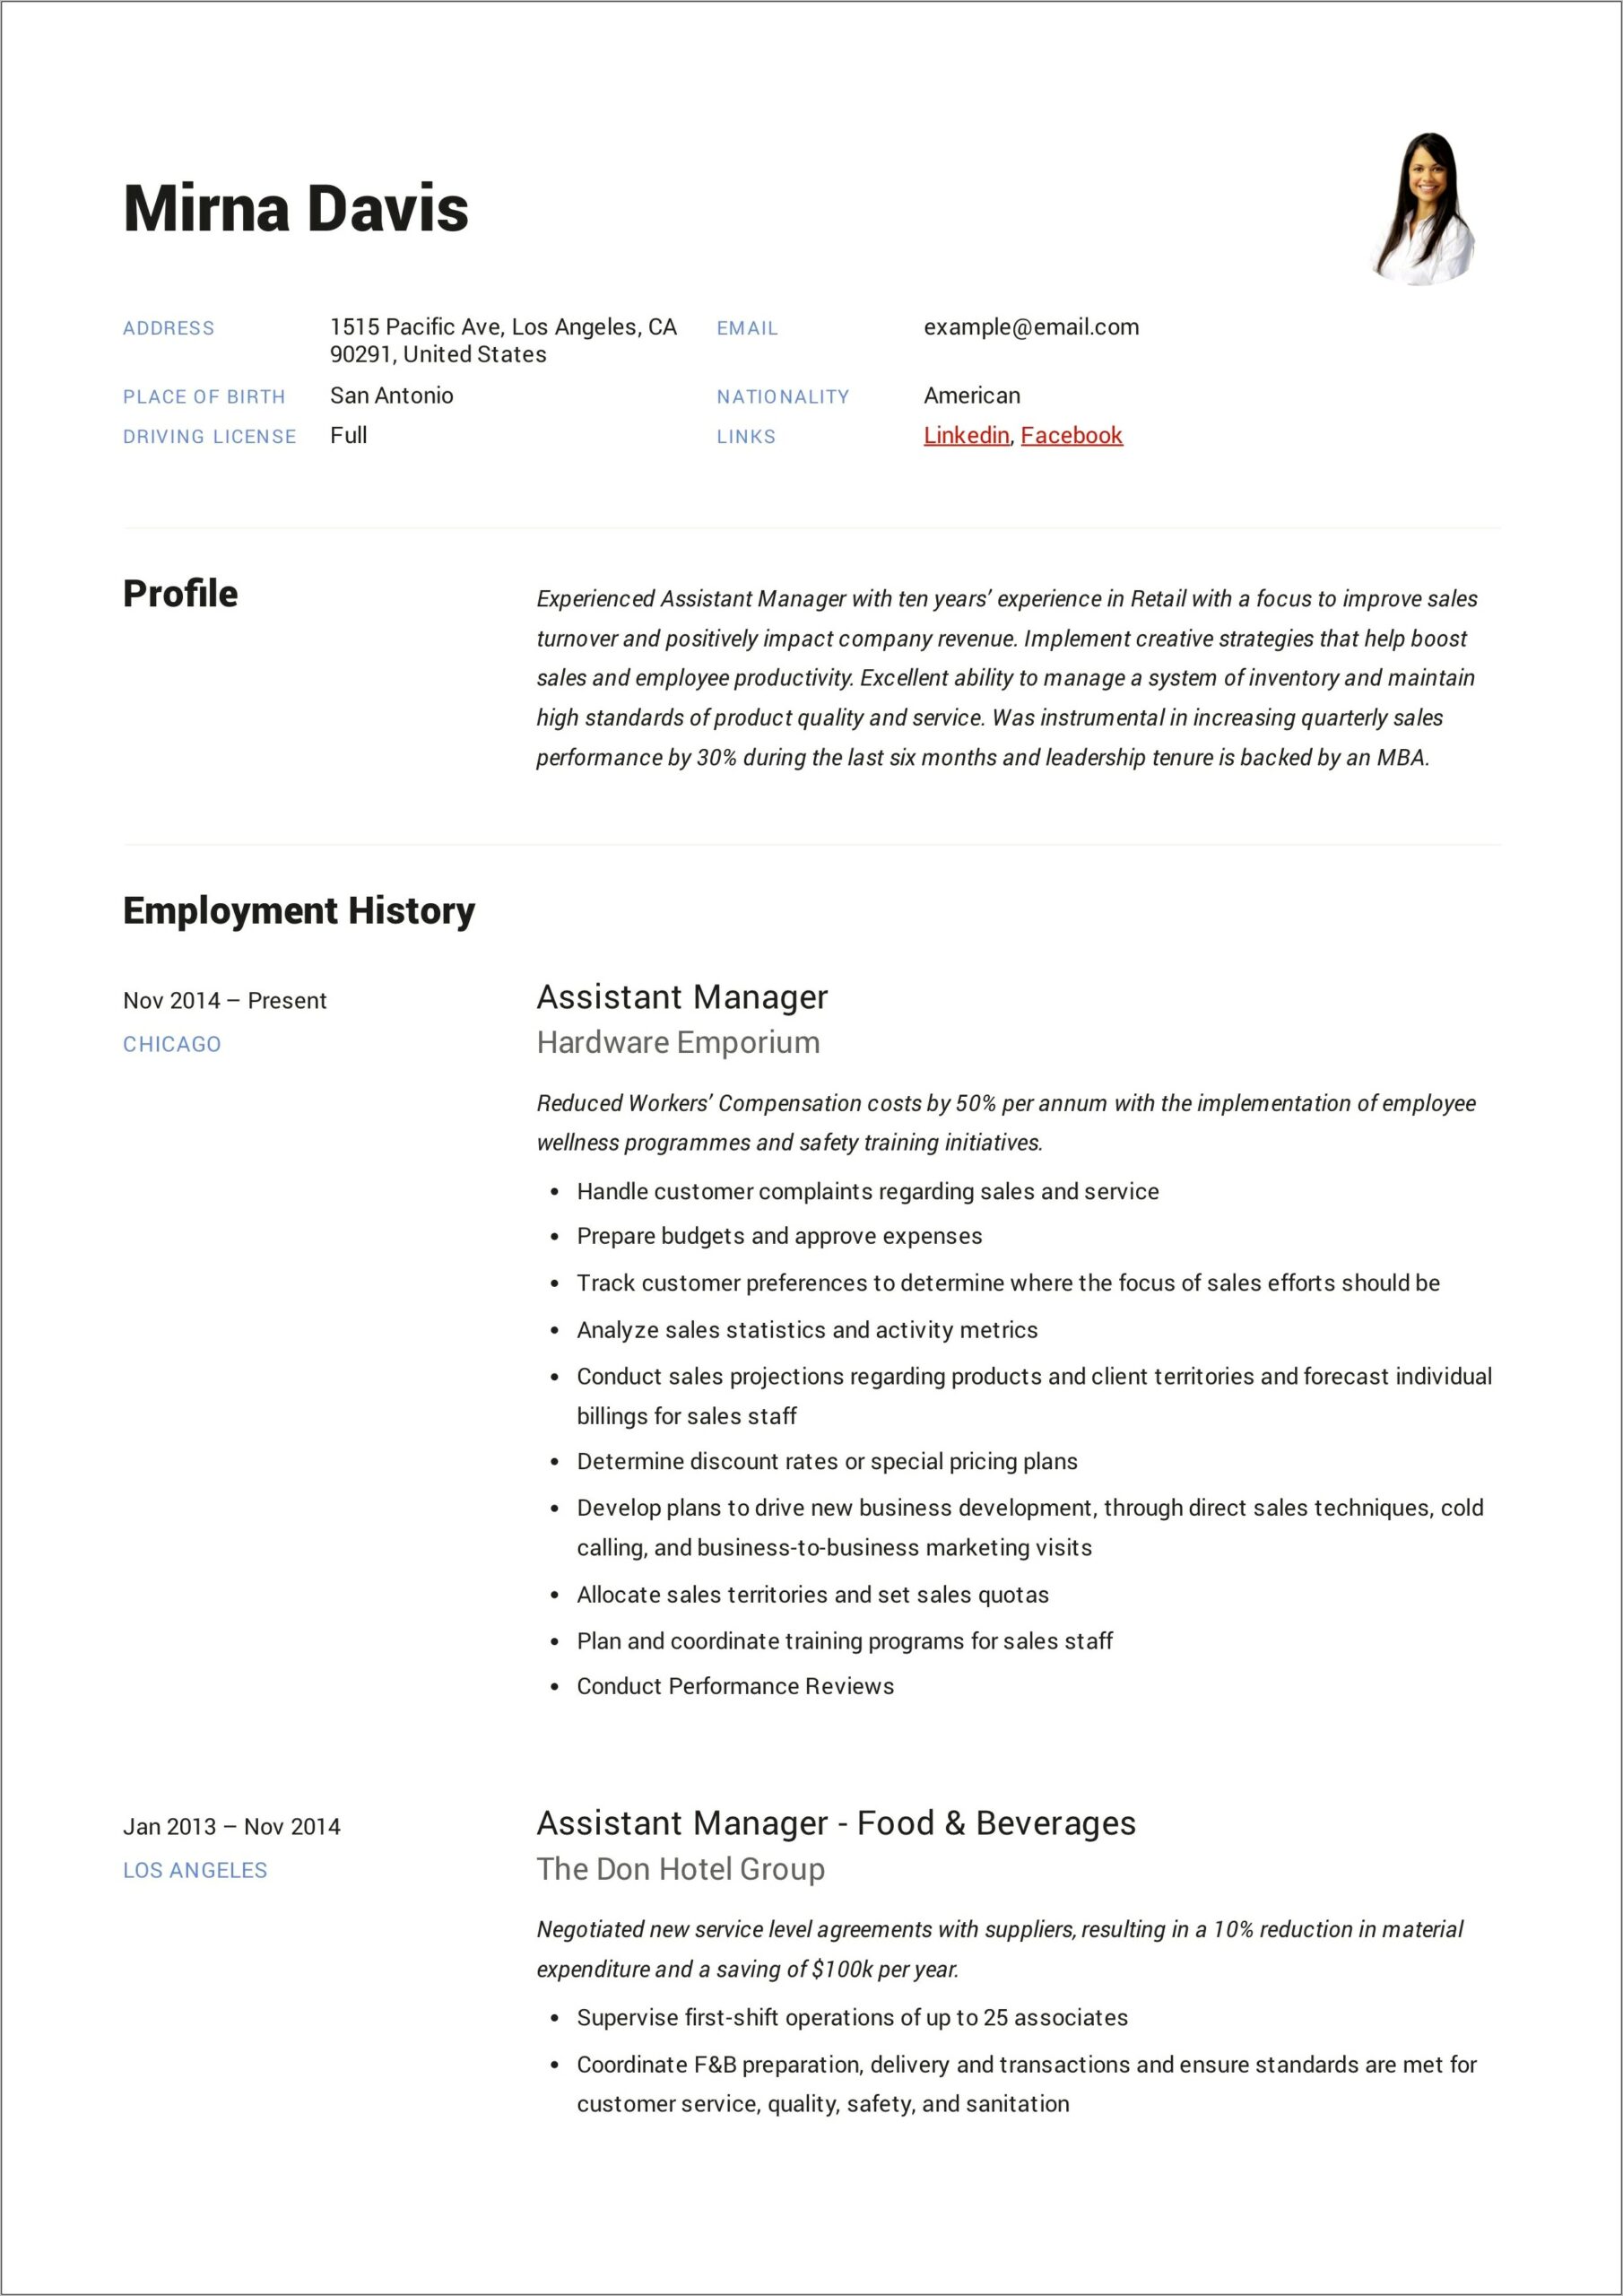 Resume Format For Assistant Manager Training